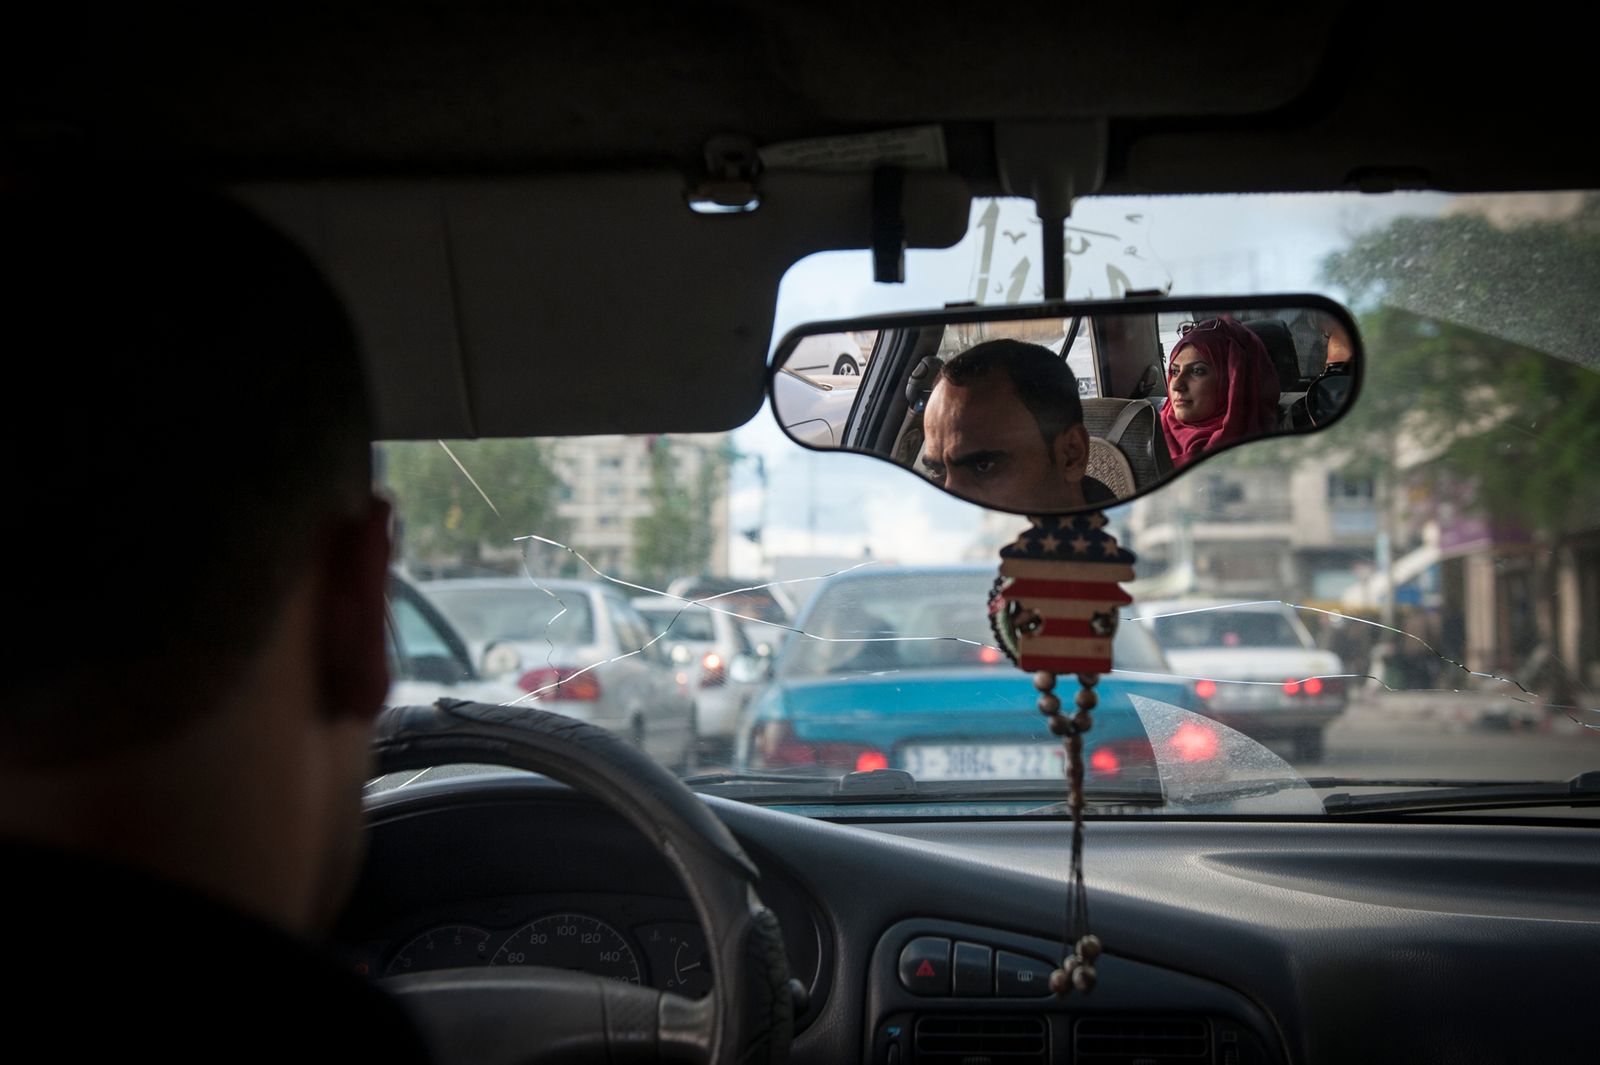 © Monique Jaques - Doaa returns home from work in Gaza City shortly after the bombing.